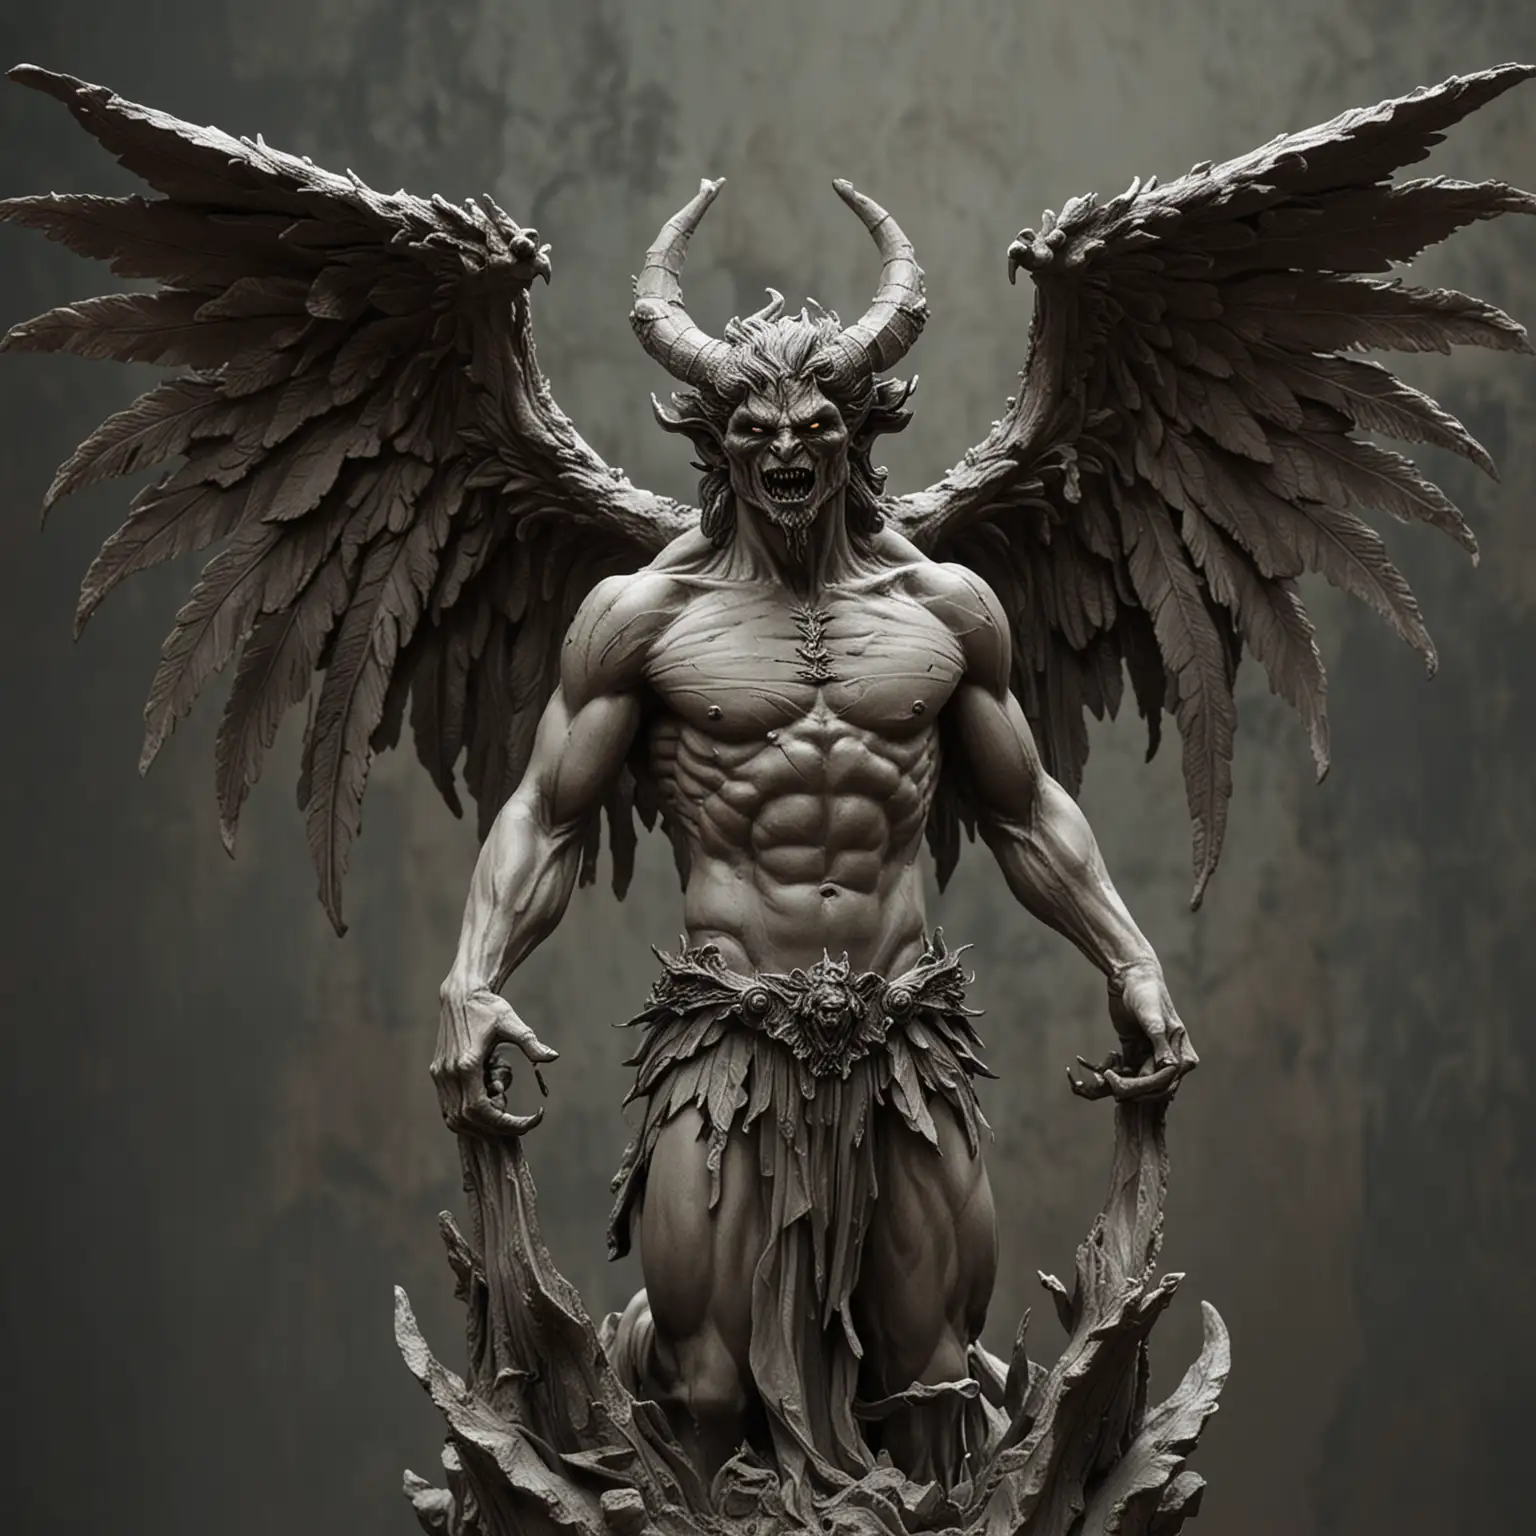 A statue of a demon with wings